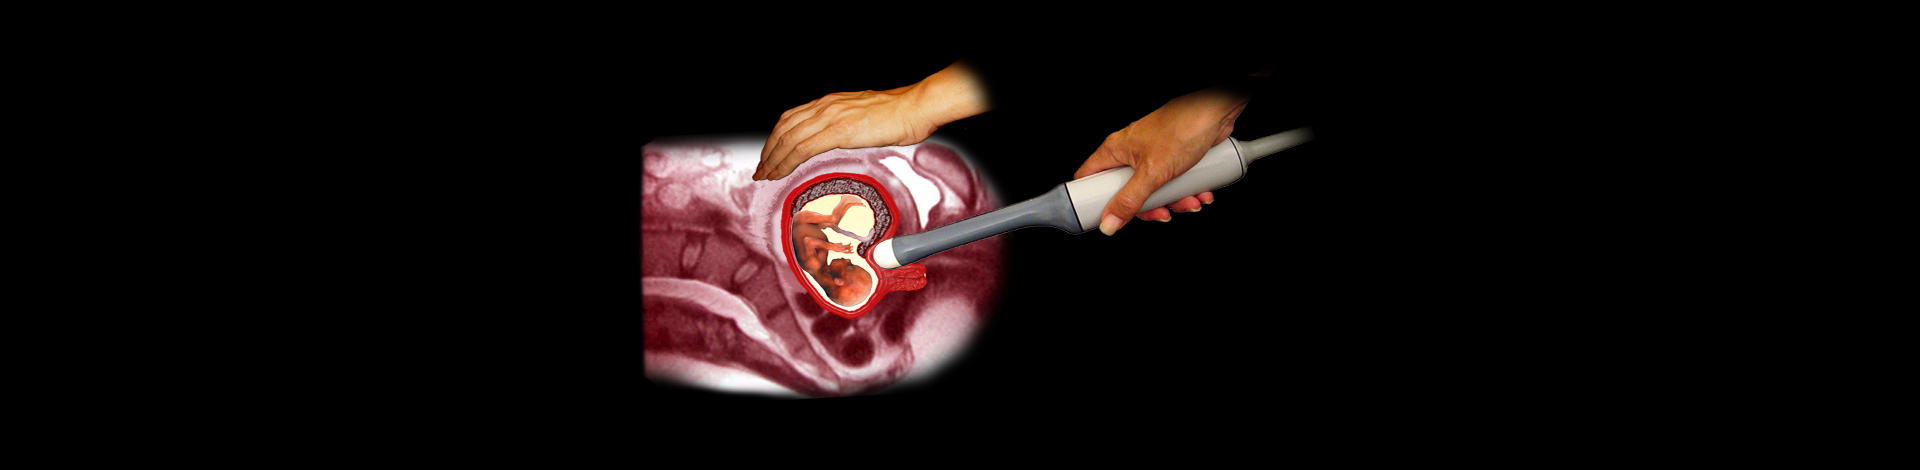 Expert Early Fetal Scan at 11-13 Weeks: Live Demo Recording